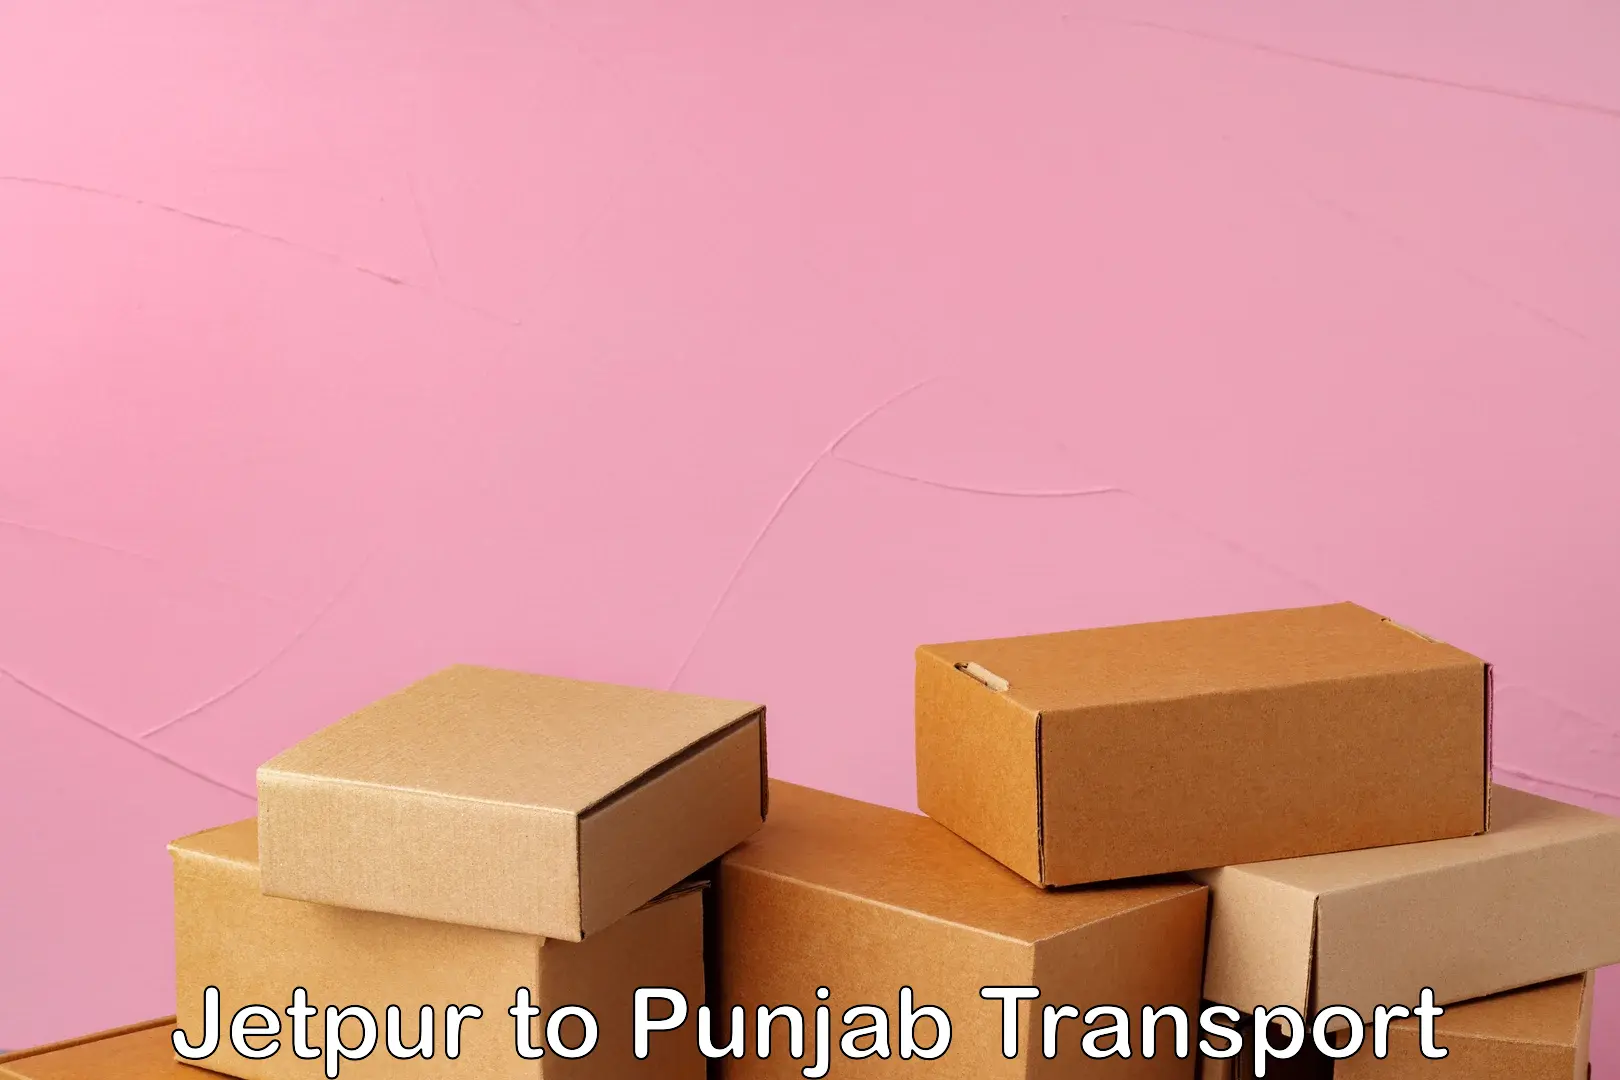 Two wheeler parcel service in Jetpur to Batala